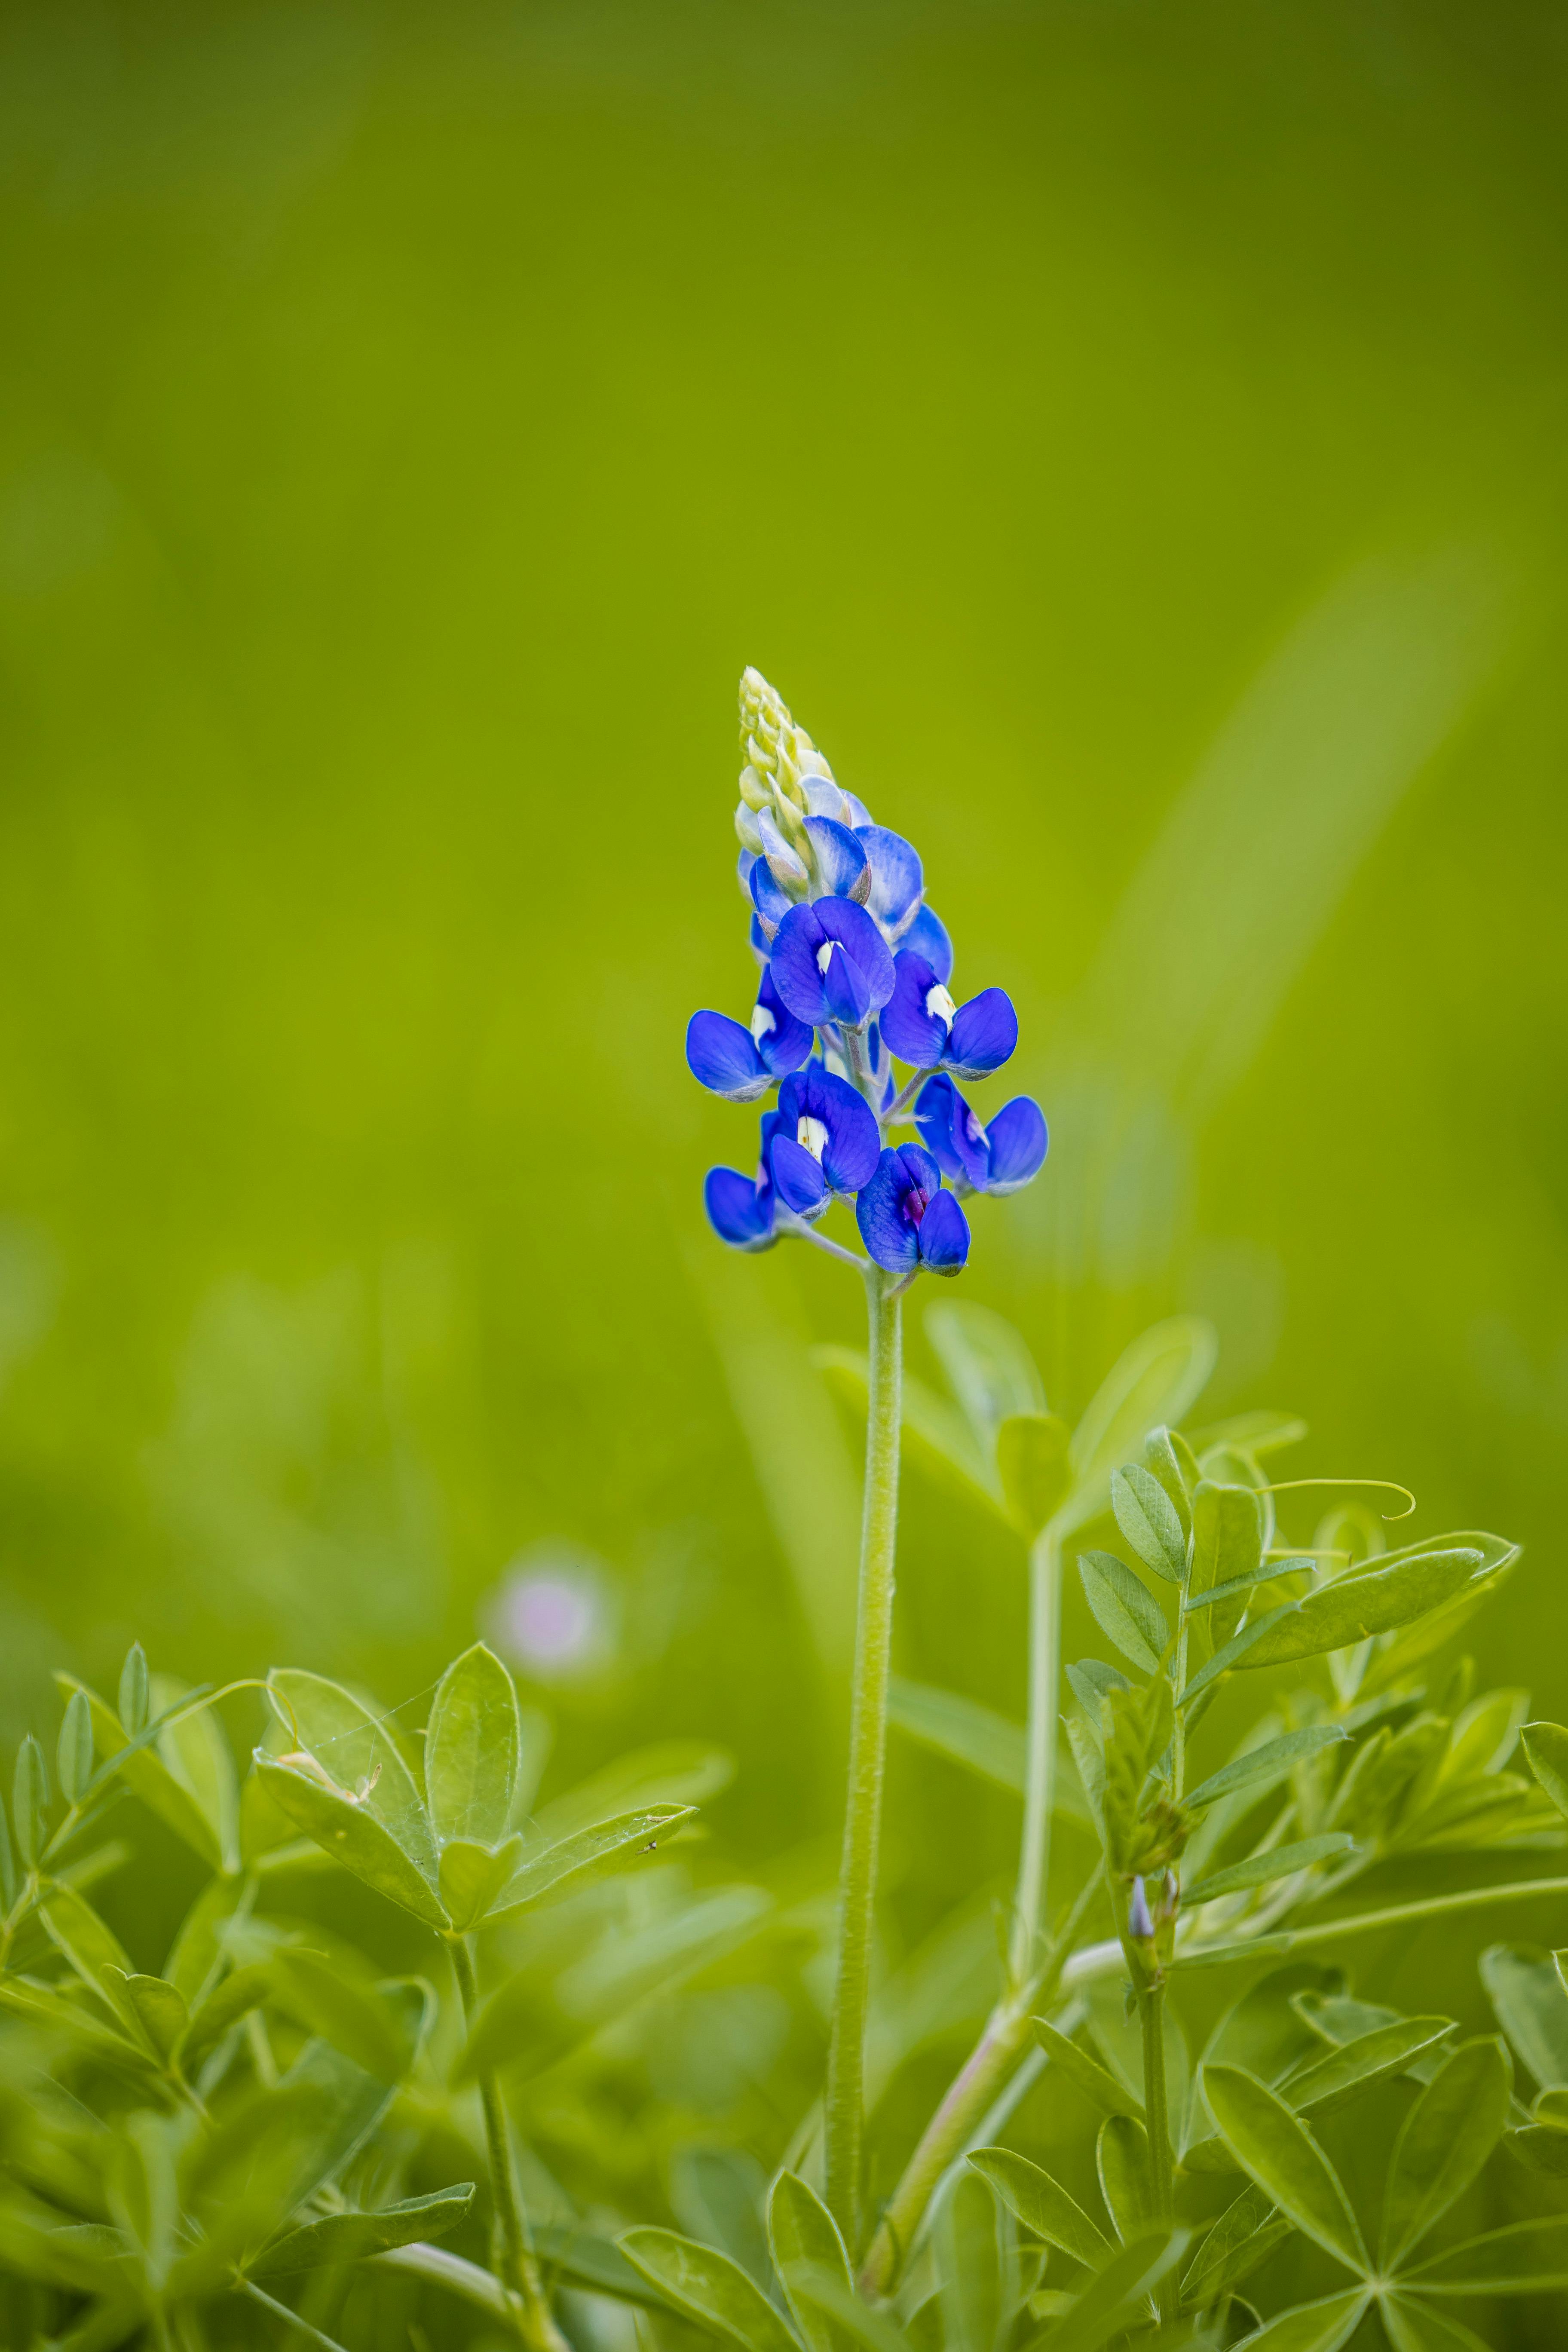 Wild Flower Bluebonnet in Texas Stock Photo  Image of country magenta  76664948